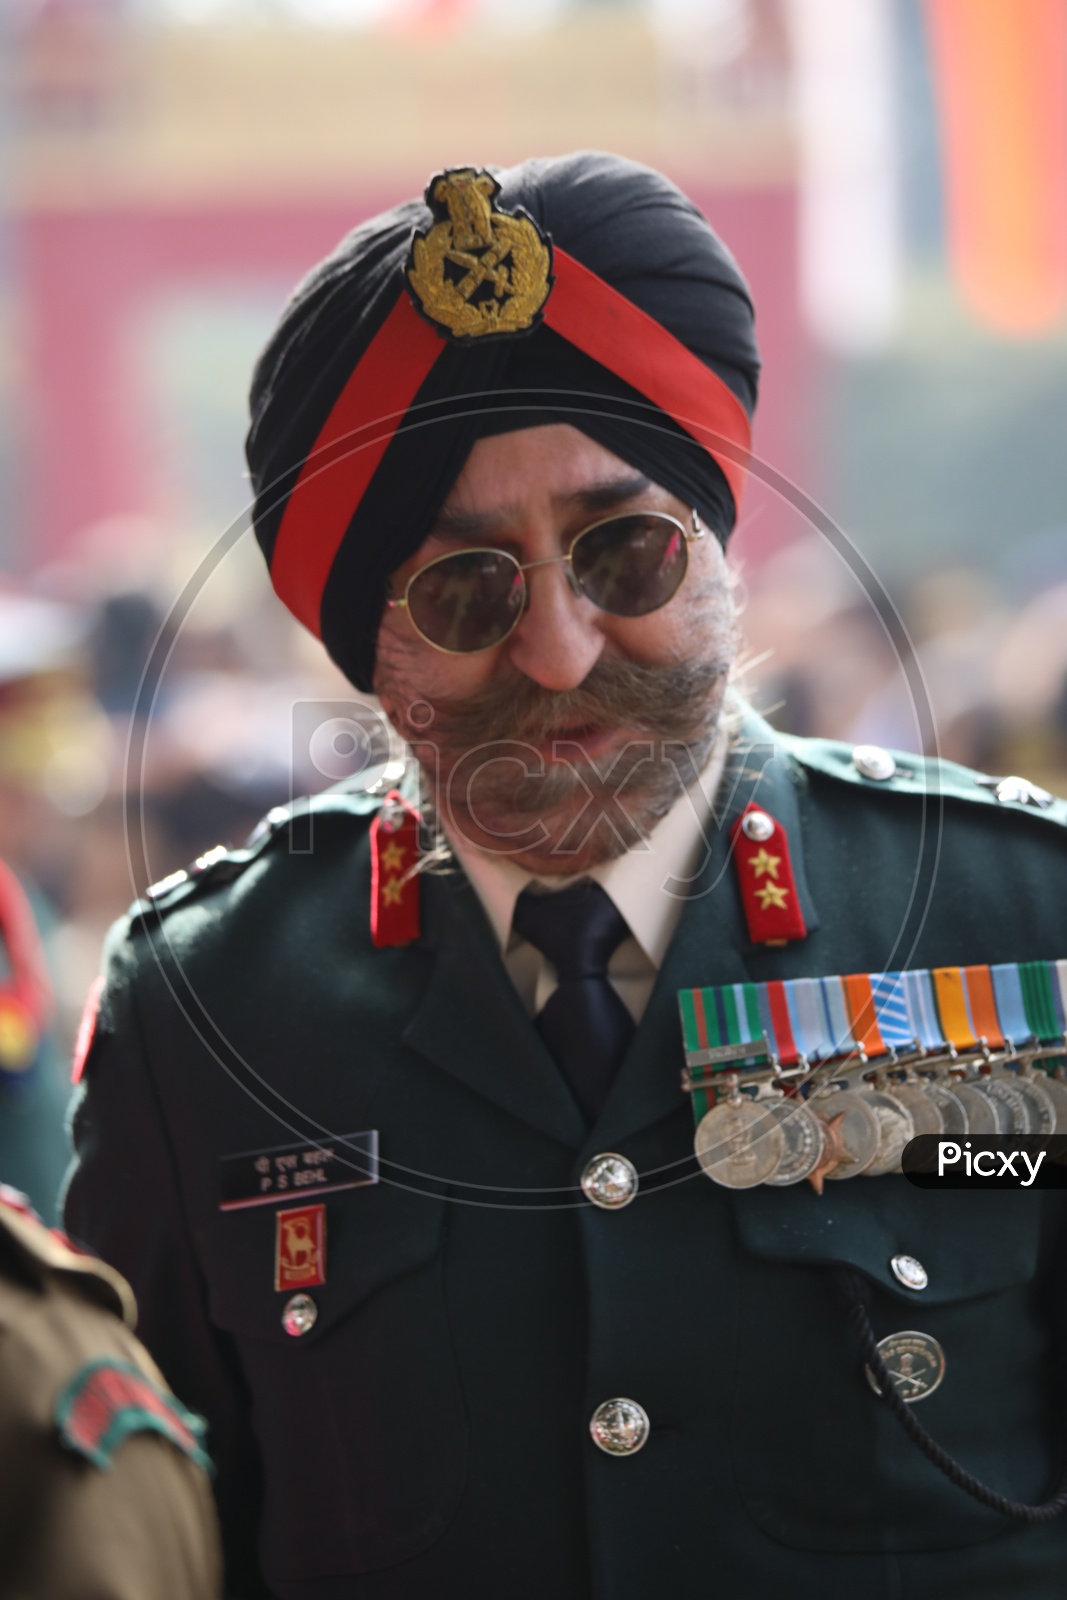 Major General P S Behl Indian Army at Indian Army Day Celebrations at Parade Ground in Delhi